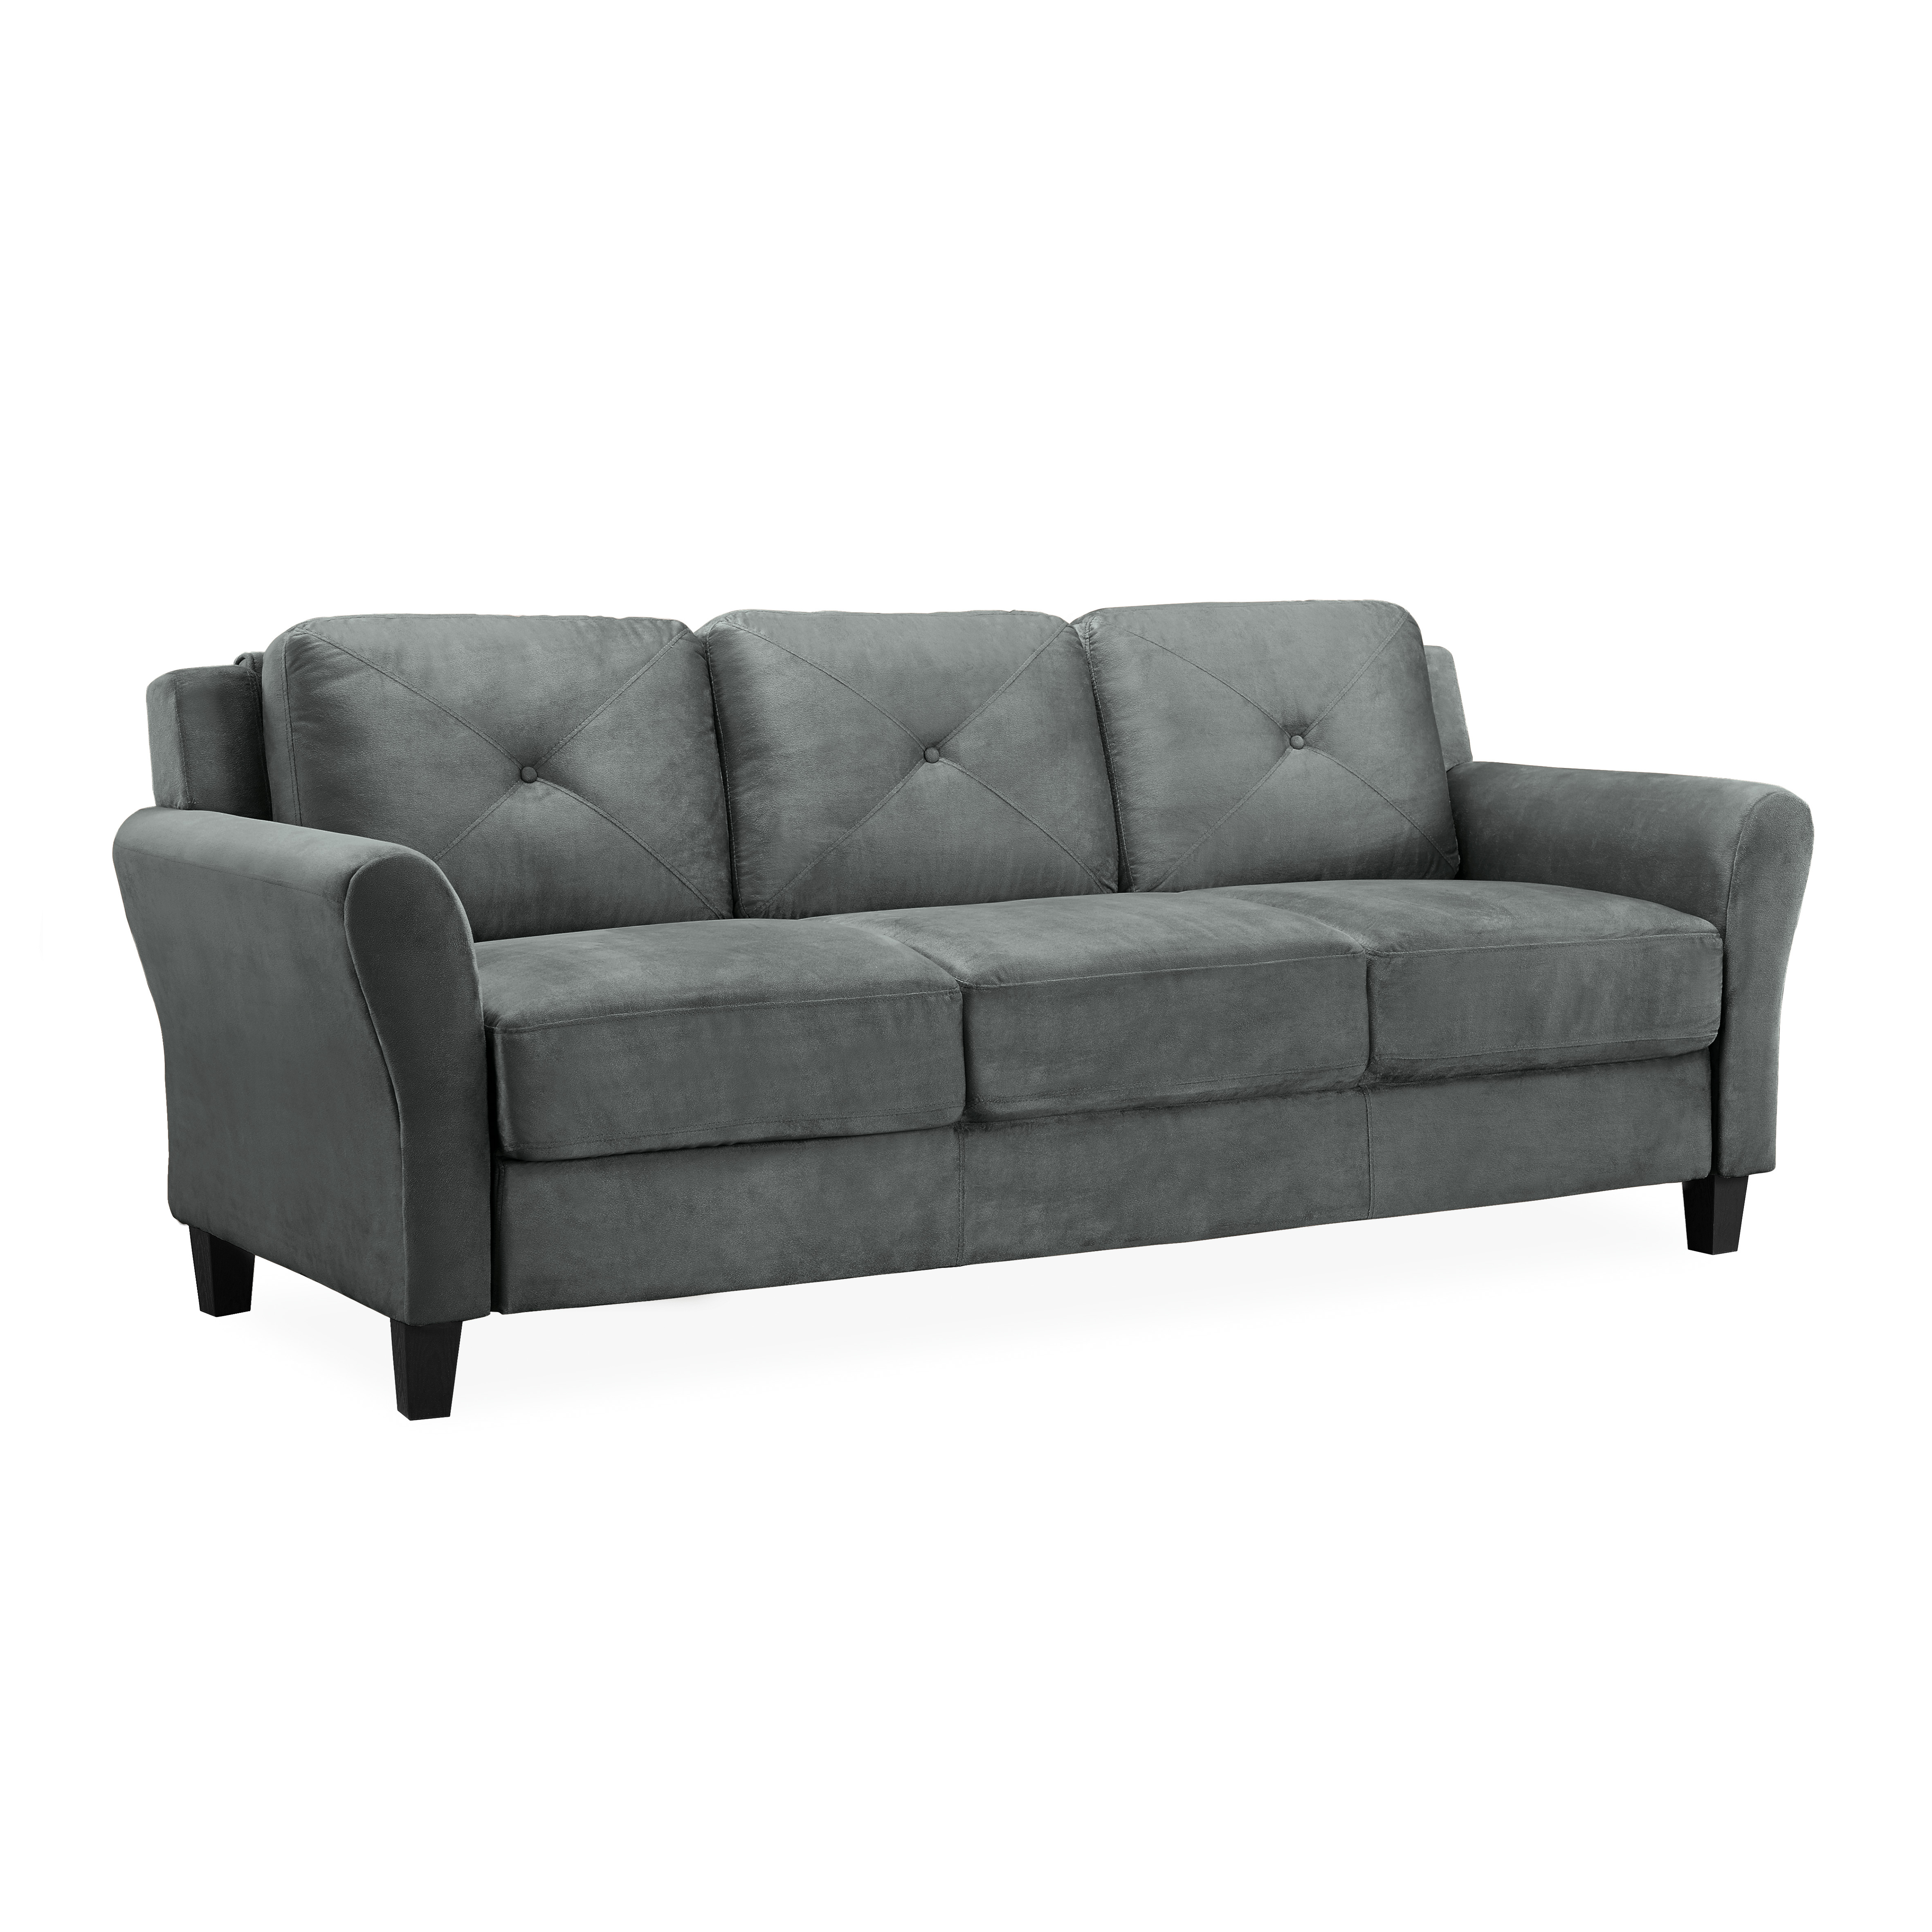 Lifestyle Solutions Taryn Traditional Sofa with Rolled Arms, Dark Gray Fabric - image 2 of 8